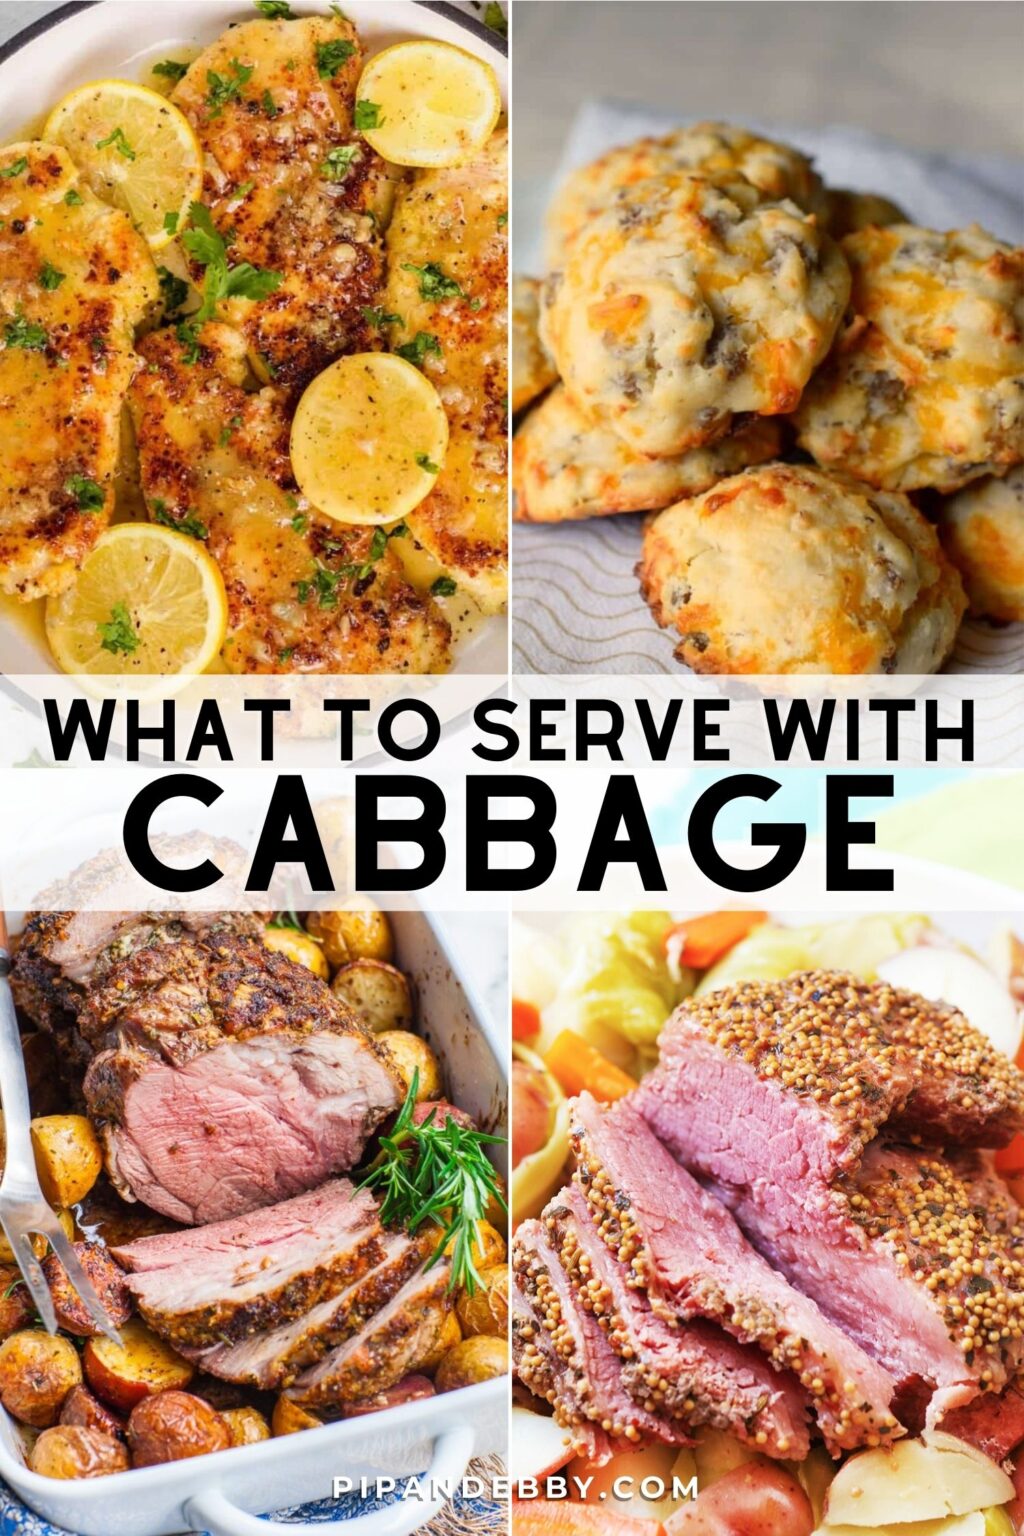 What To Serve With Cabbage - 15 delicious ideas! - Pip and Ebby